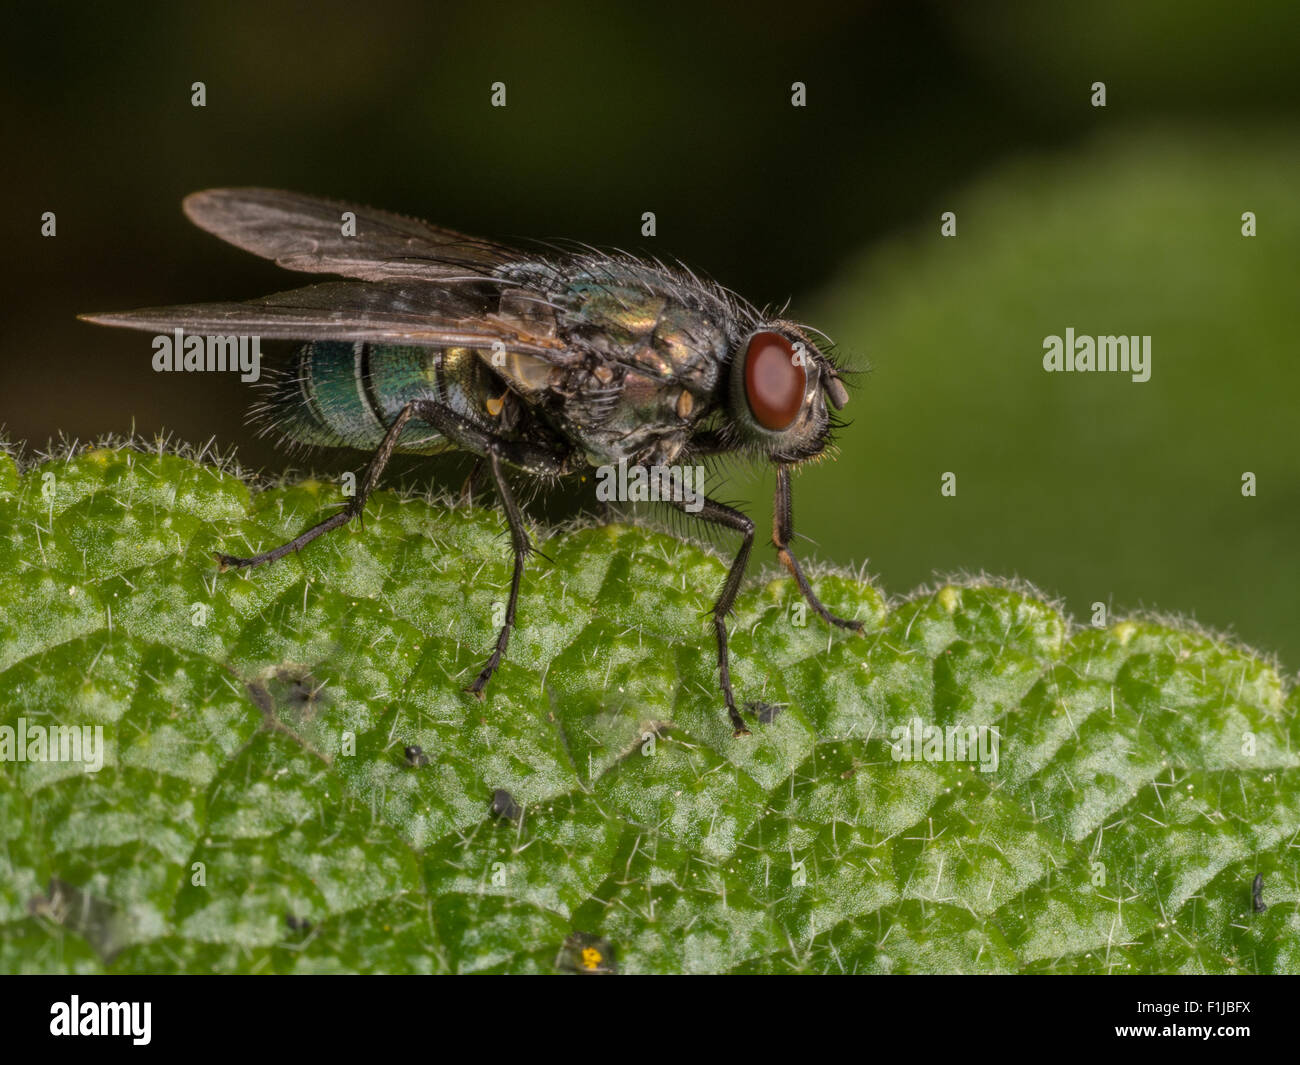 A Greenbottle or Lucilia Caesar Blowfly perched on a brown leaf. Stock Photo